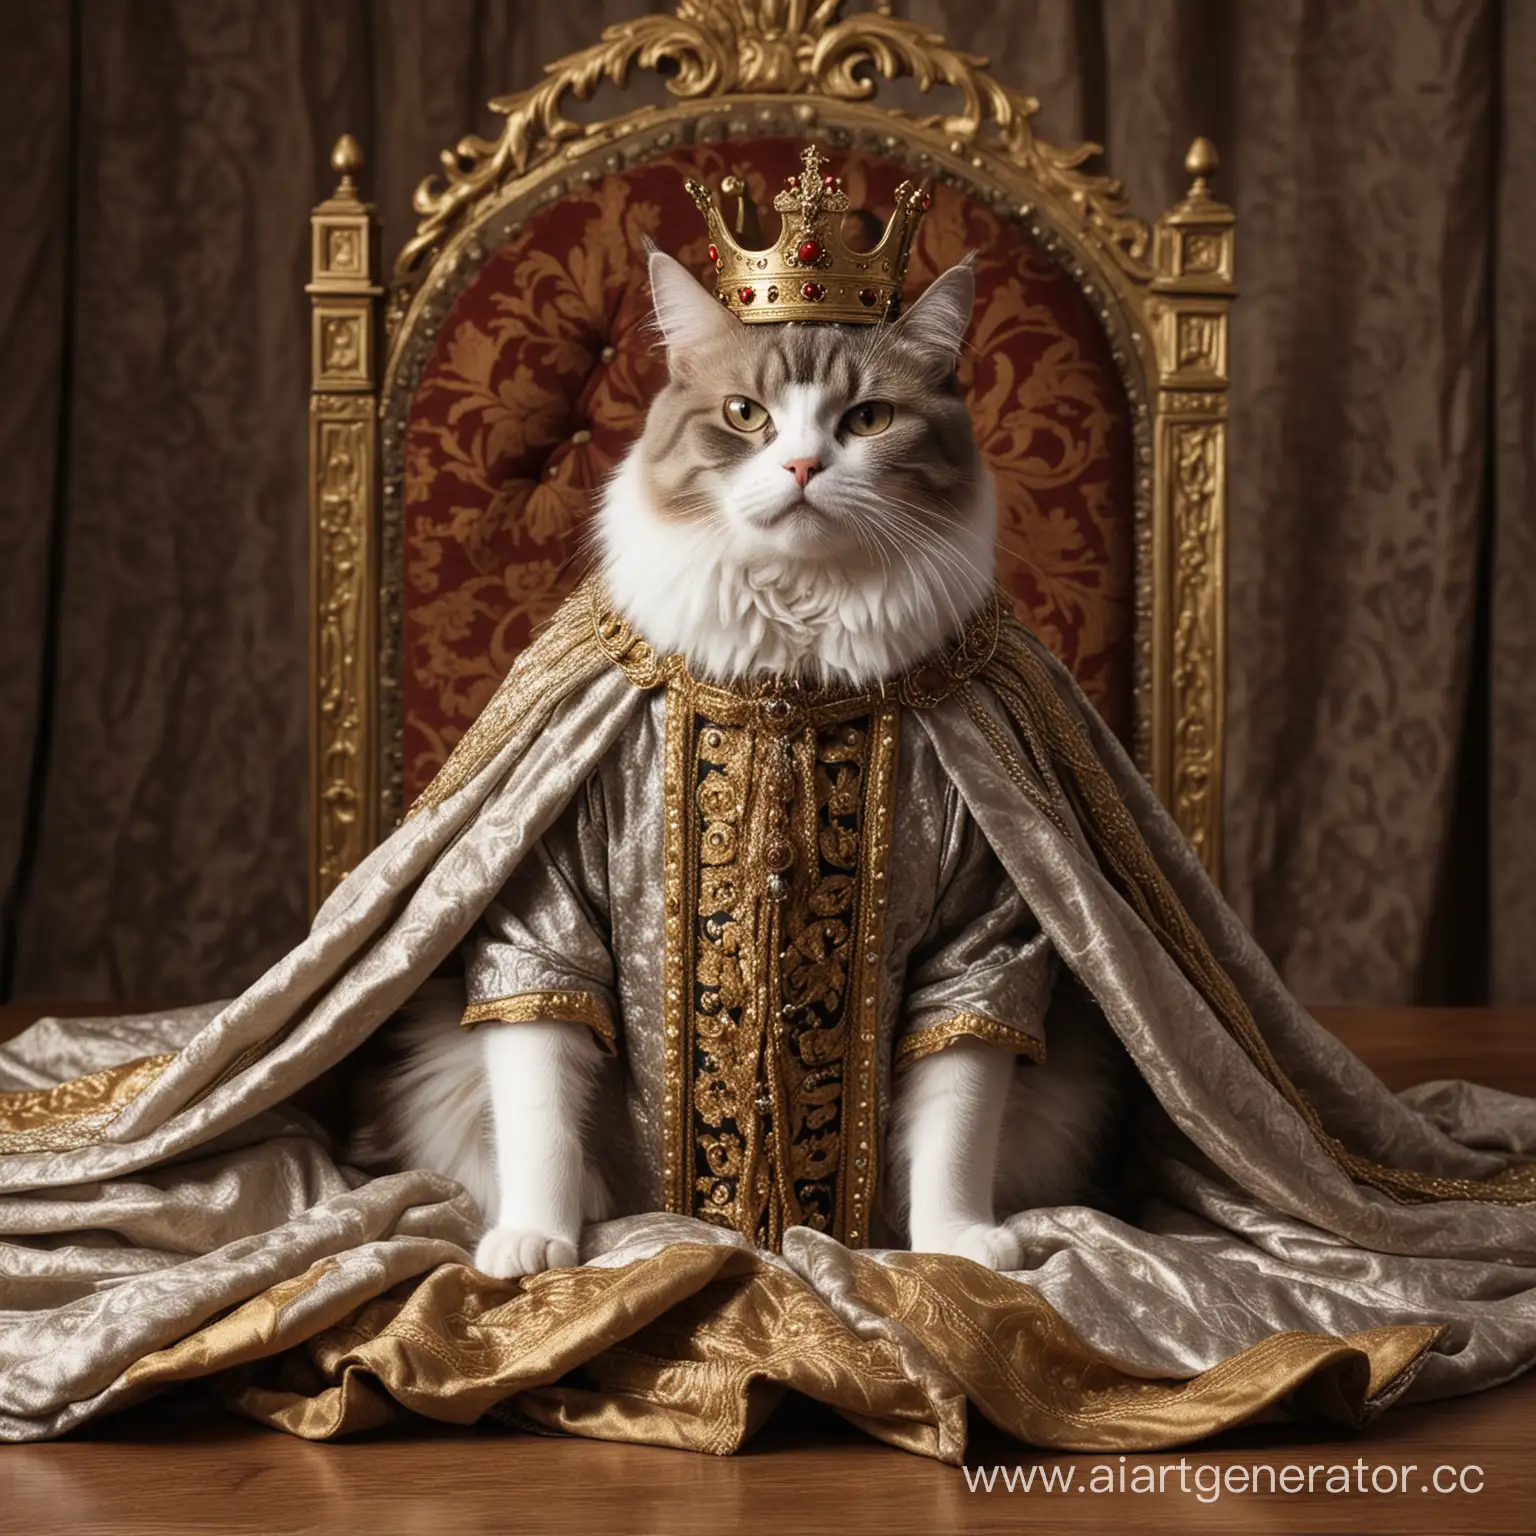 Regal-Cat-in-Royal-Attire-at-the-Kings-Table